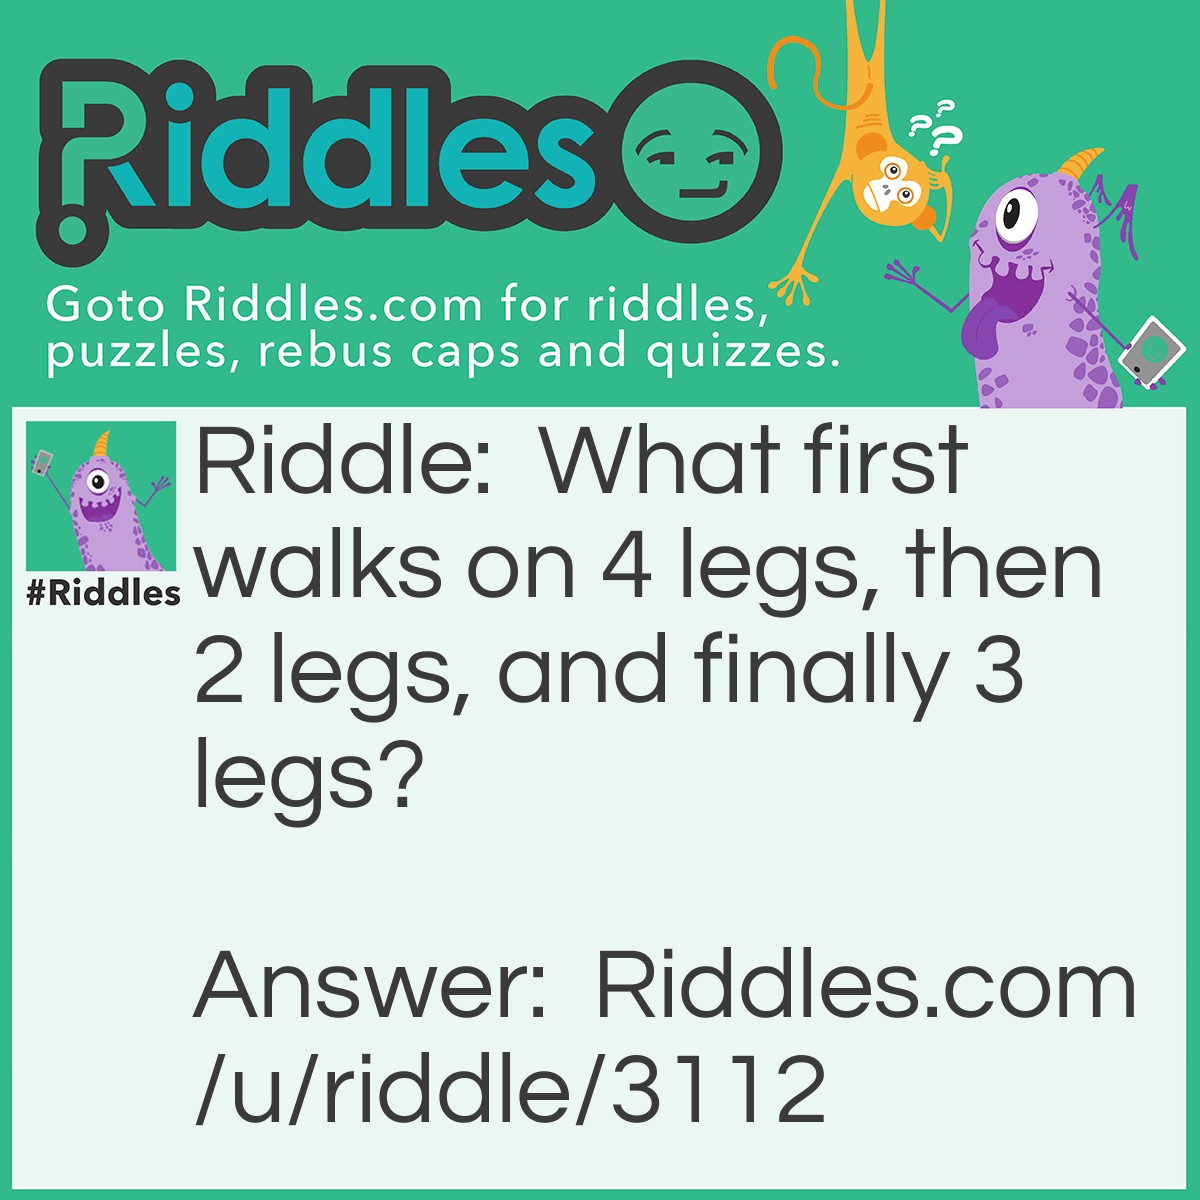 Riddle: What first walks on 4 legs, then 2 legs, and finally 3 legs? Answer: Man. When you are born, you are forced to crawl on all-fours, as an adult you walk on 2 legs and as an old man, you use a cane, therefore 3 legs.